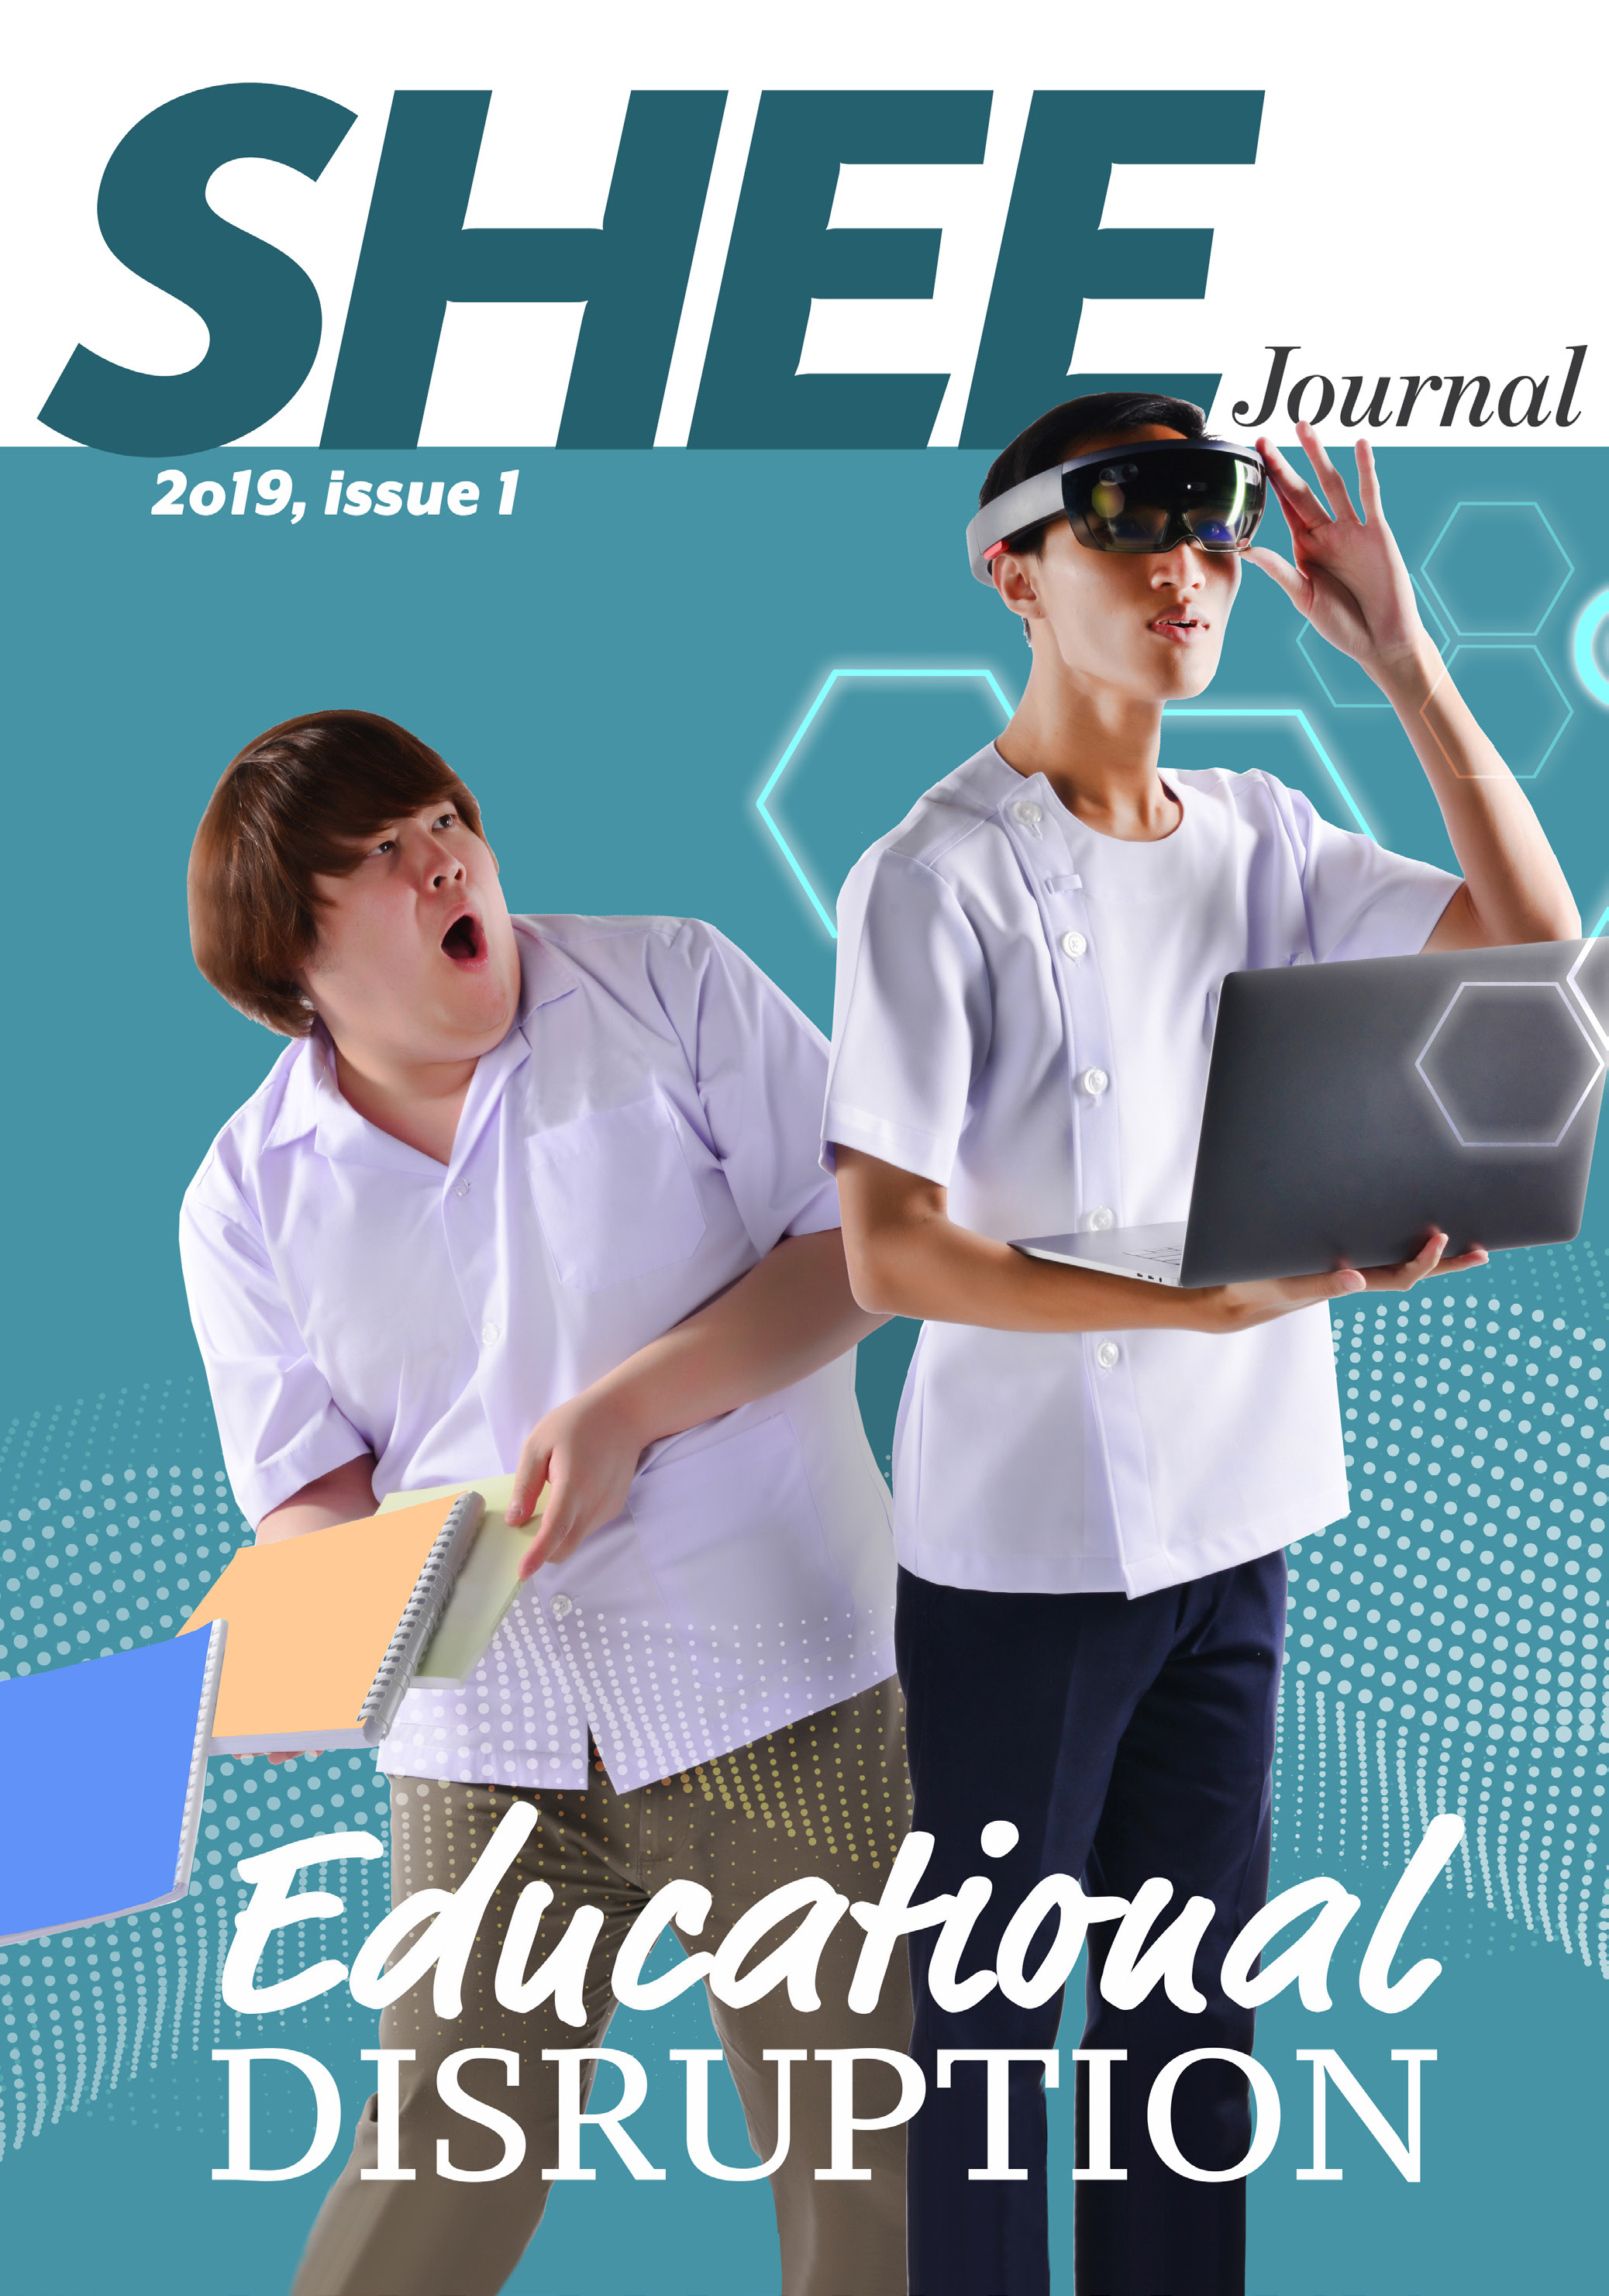 Journal Issue 1, 2019 เรื่อง Educational Disruption